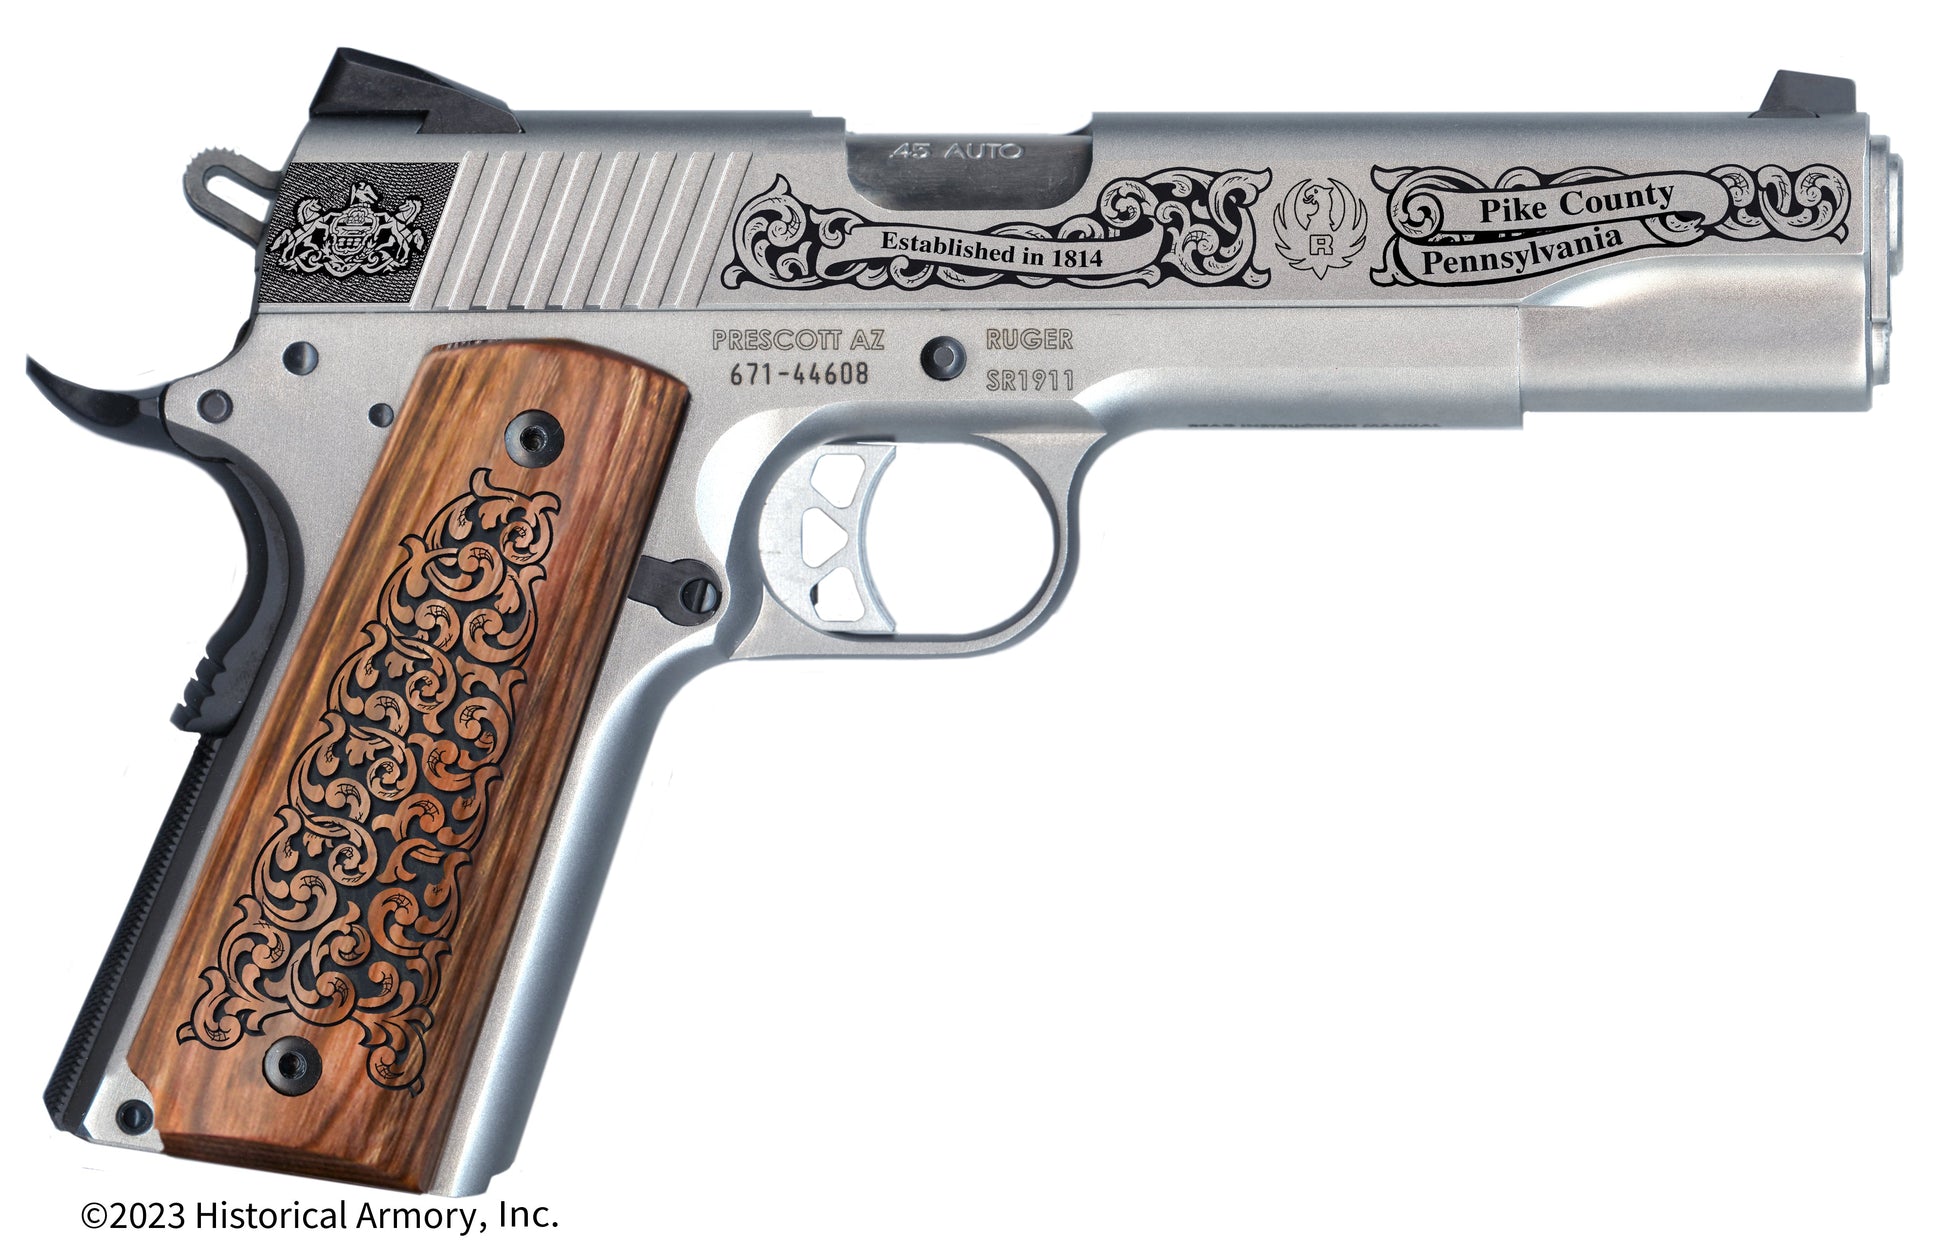 Pike County Pennsylvania Engraved .45 Auto Ruger 1911